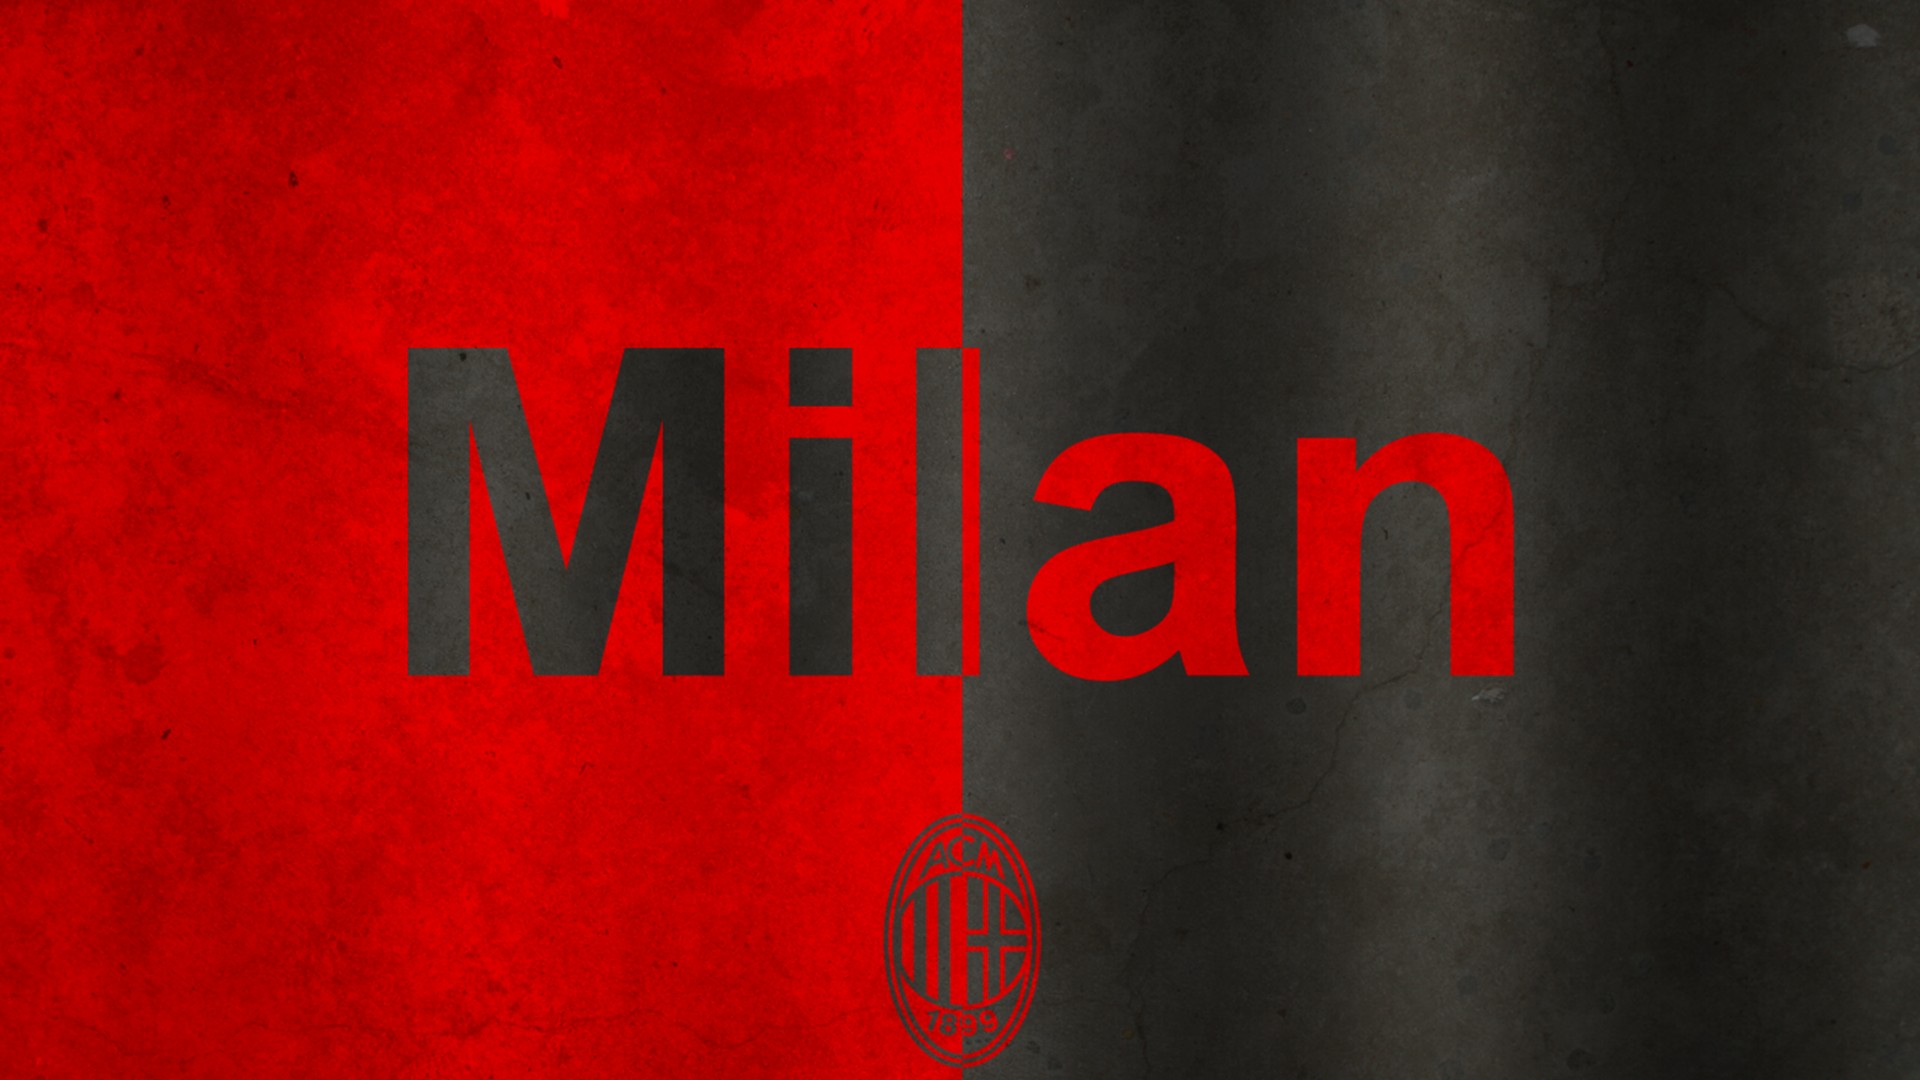 HD AC Milan Wallpapers With high-resolution 1920X1080 pixel. You can use this wallpaper for your Desktop Computers, Mac Screensavers, Windows Backgrounds, iPhone Wallpapers, Tablet or Android Lock screen and another Mobile device